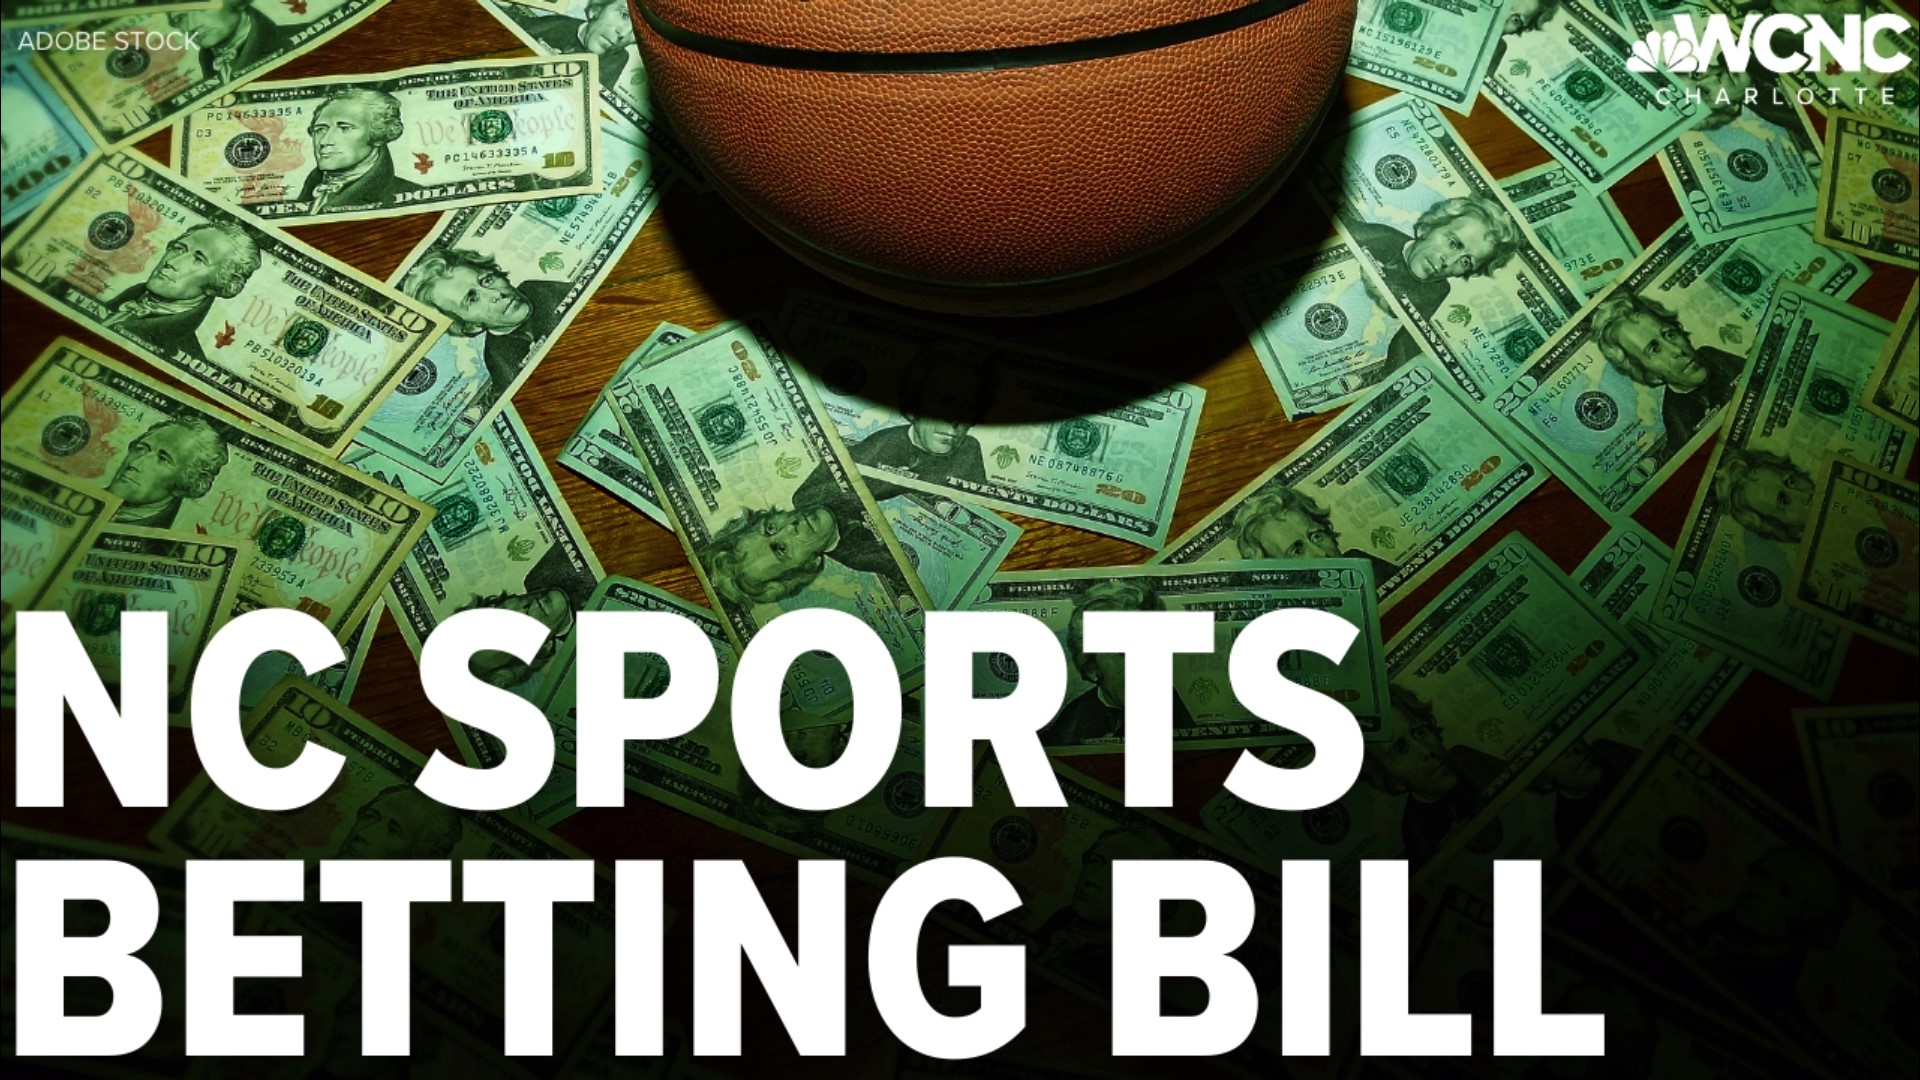 A bill filed in the North Carolina House Monday would legalize online sports gambling across the state.